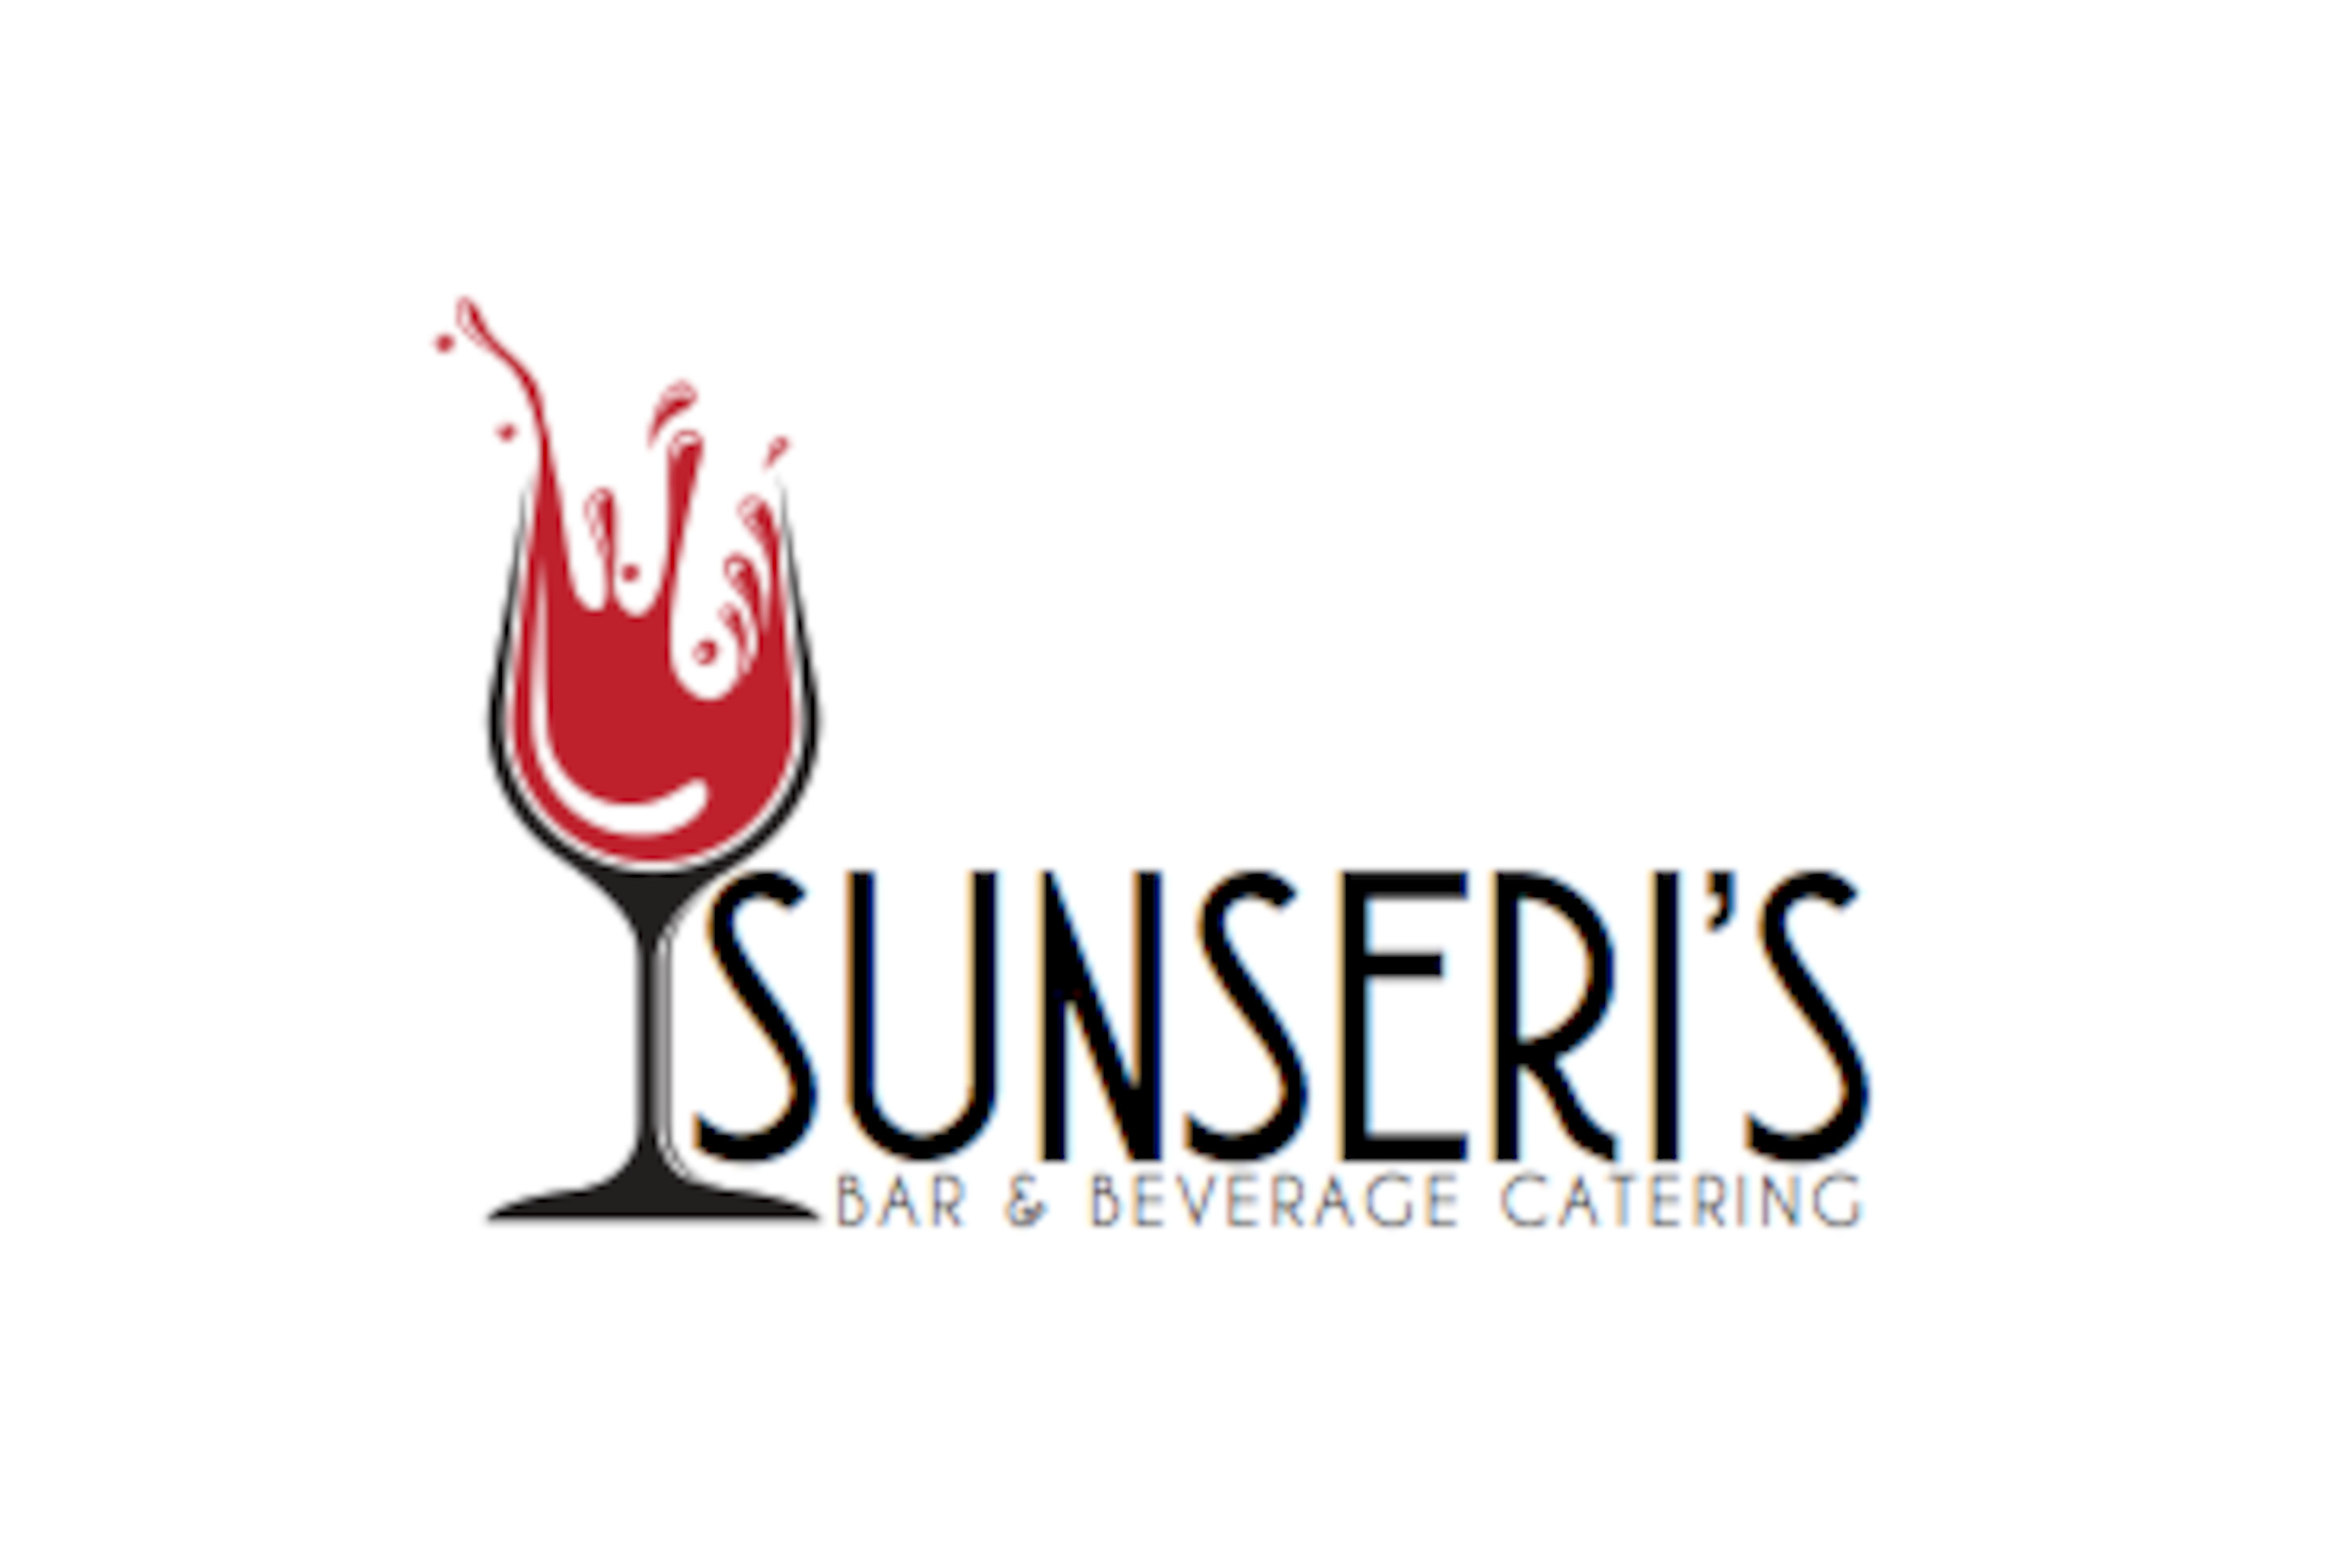 Sunseri's Bar & Beverage Catering Logo - Logo reads "Sunseri'" in large text above "Bar & Beverage Catering" in smaller text to the right of a large illustrated wine glass with red liquid splashing out of the top